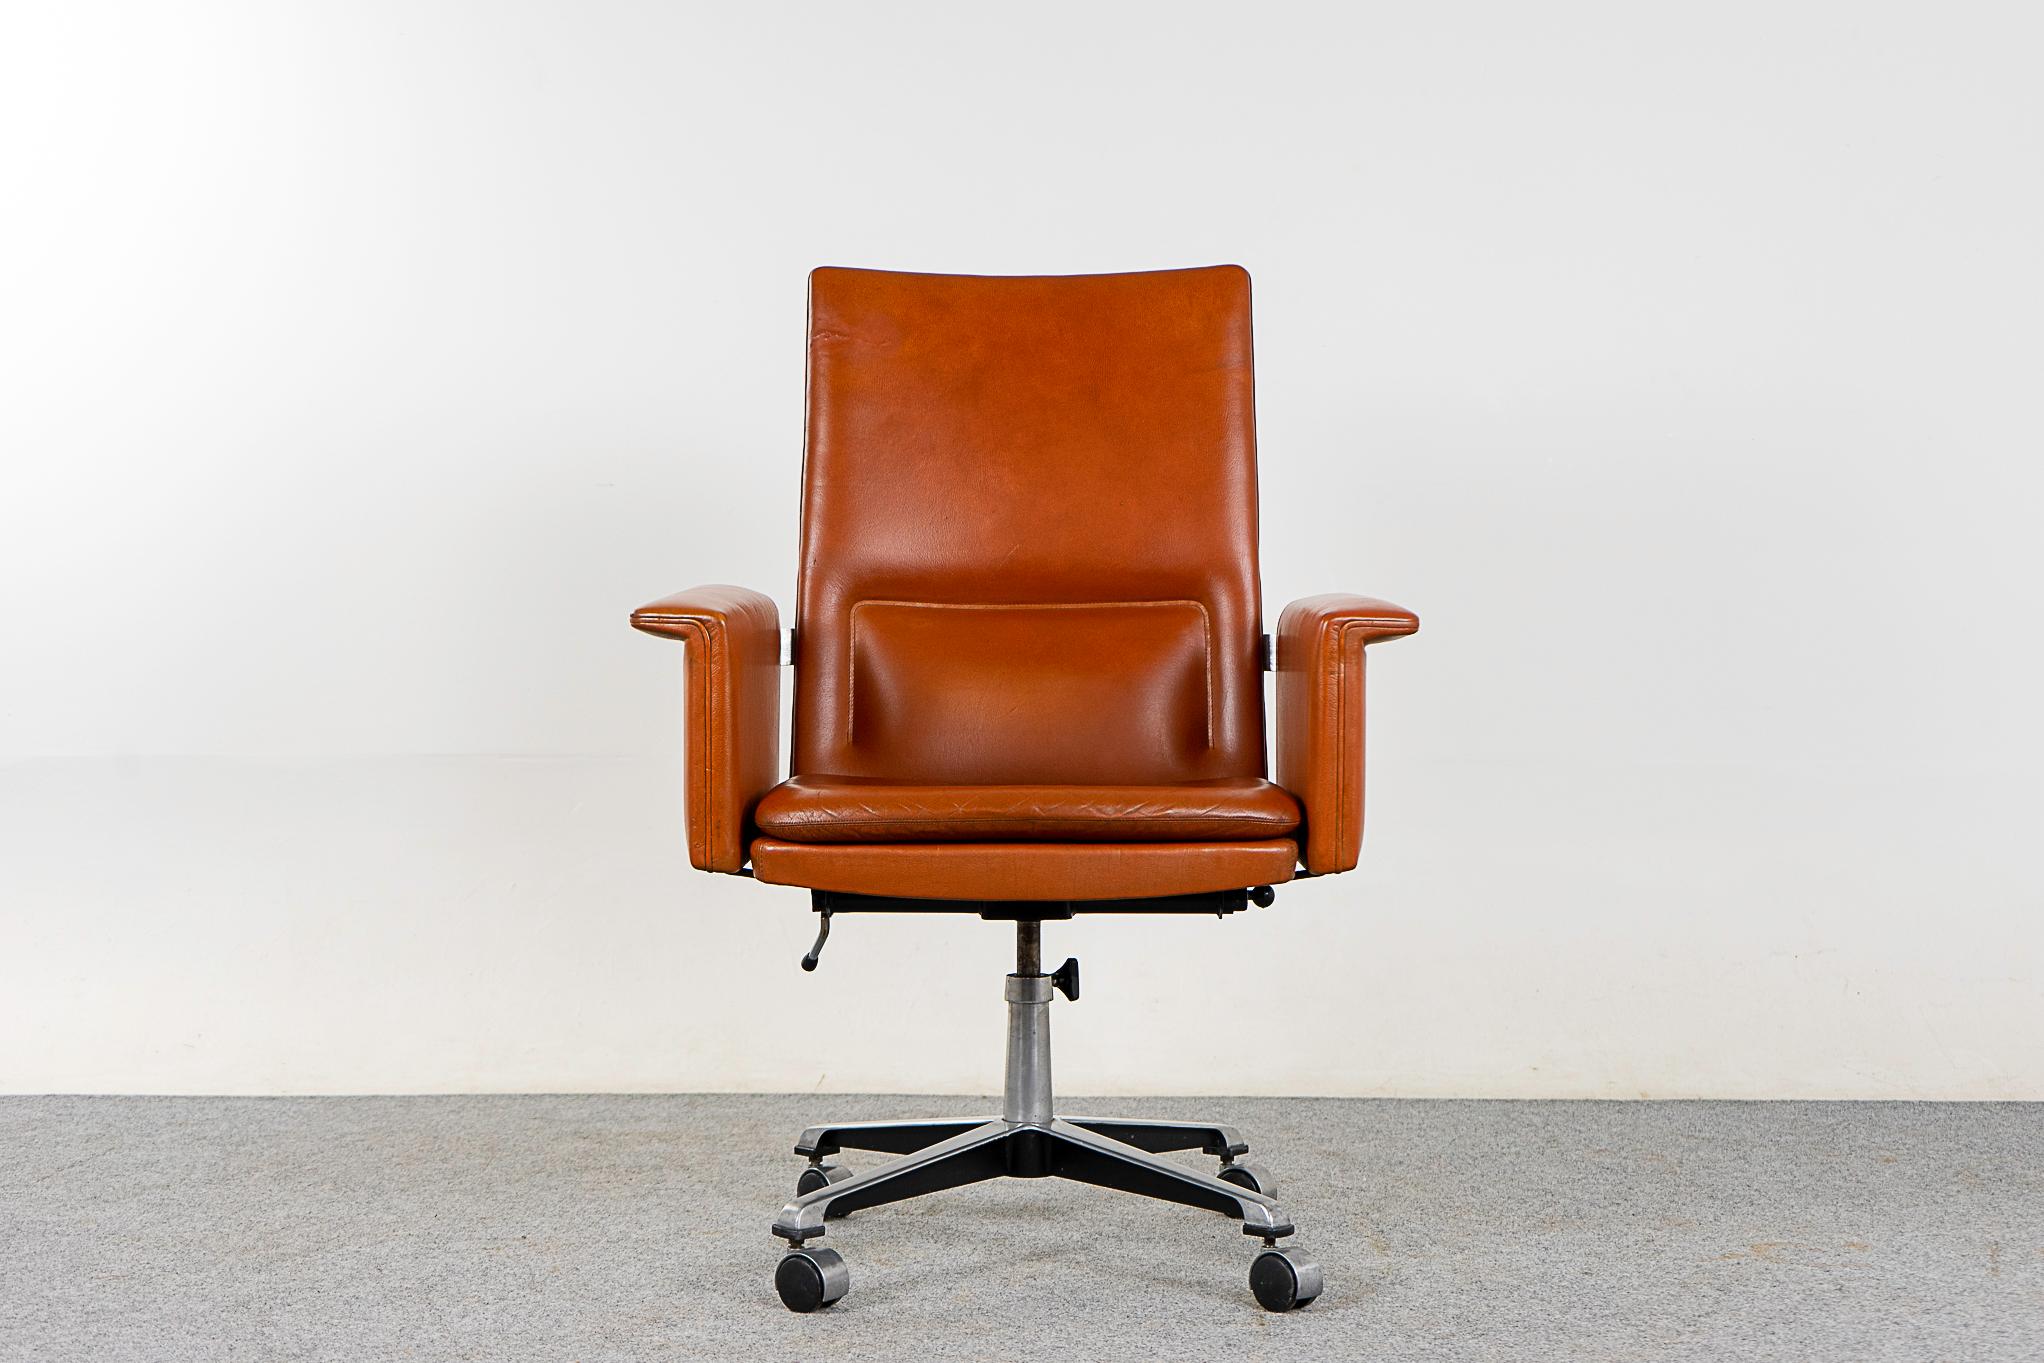 Leather and chrome Danish swivel chair, circa 1960's. Original rust colored leather with beautiful angles and excellent lumbar support. Shining metal base with smooth operating castors. Minor repair on leather. Work in style! 

Please inquie for